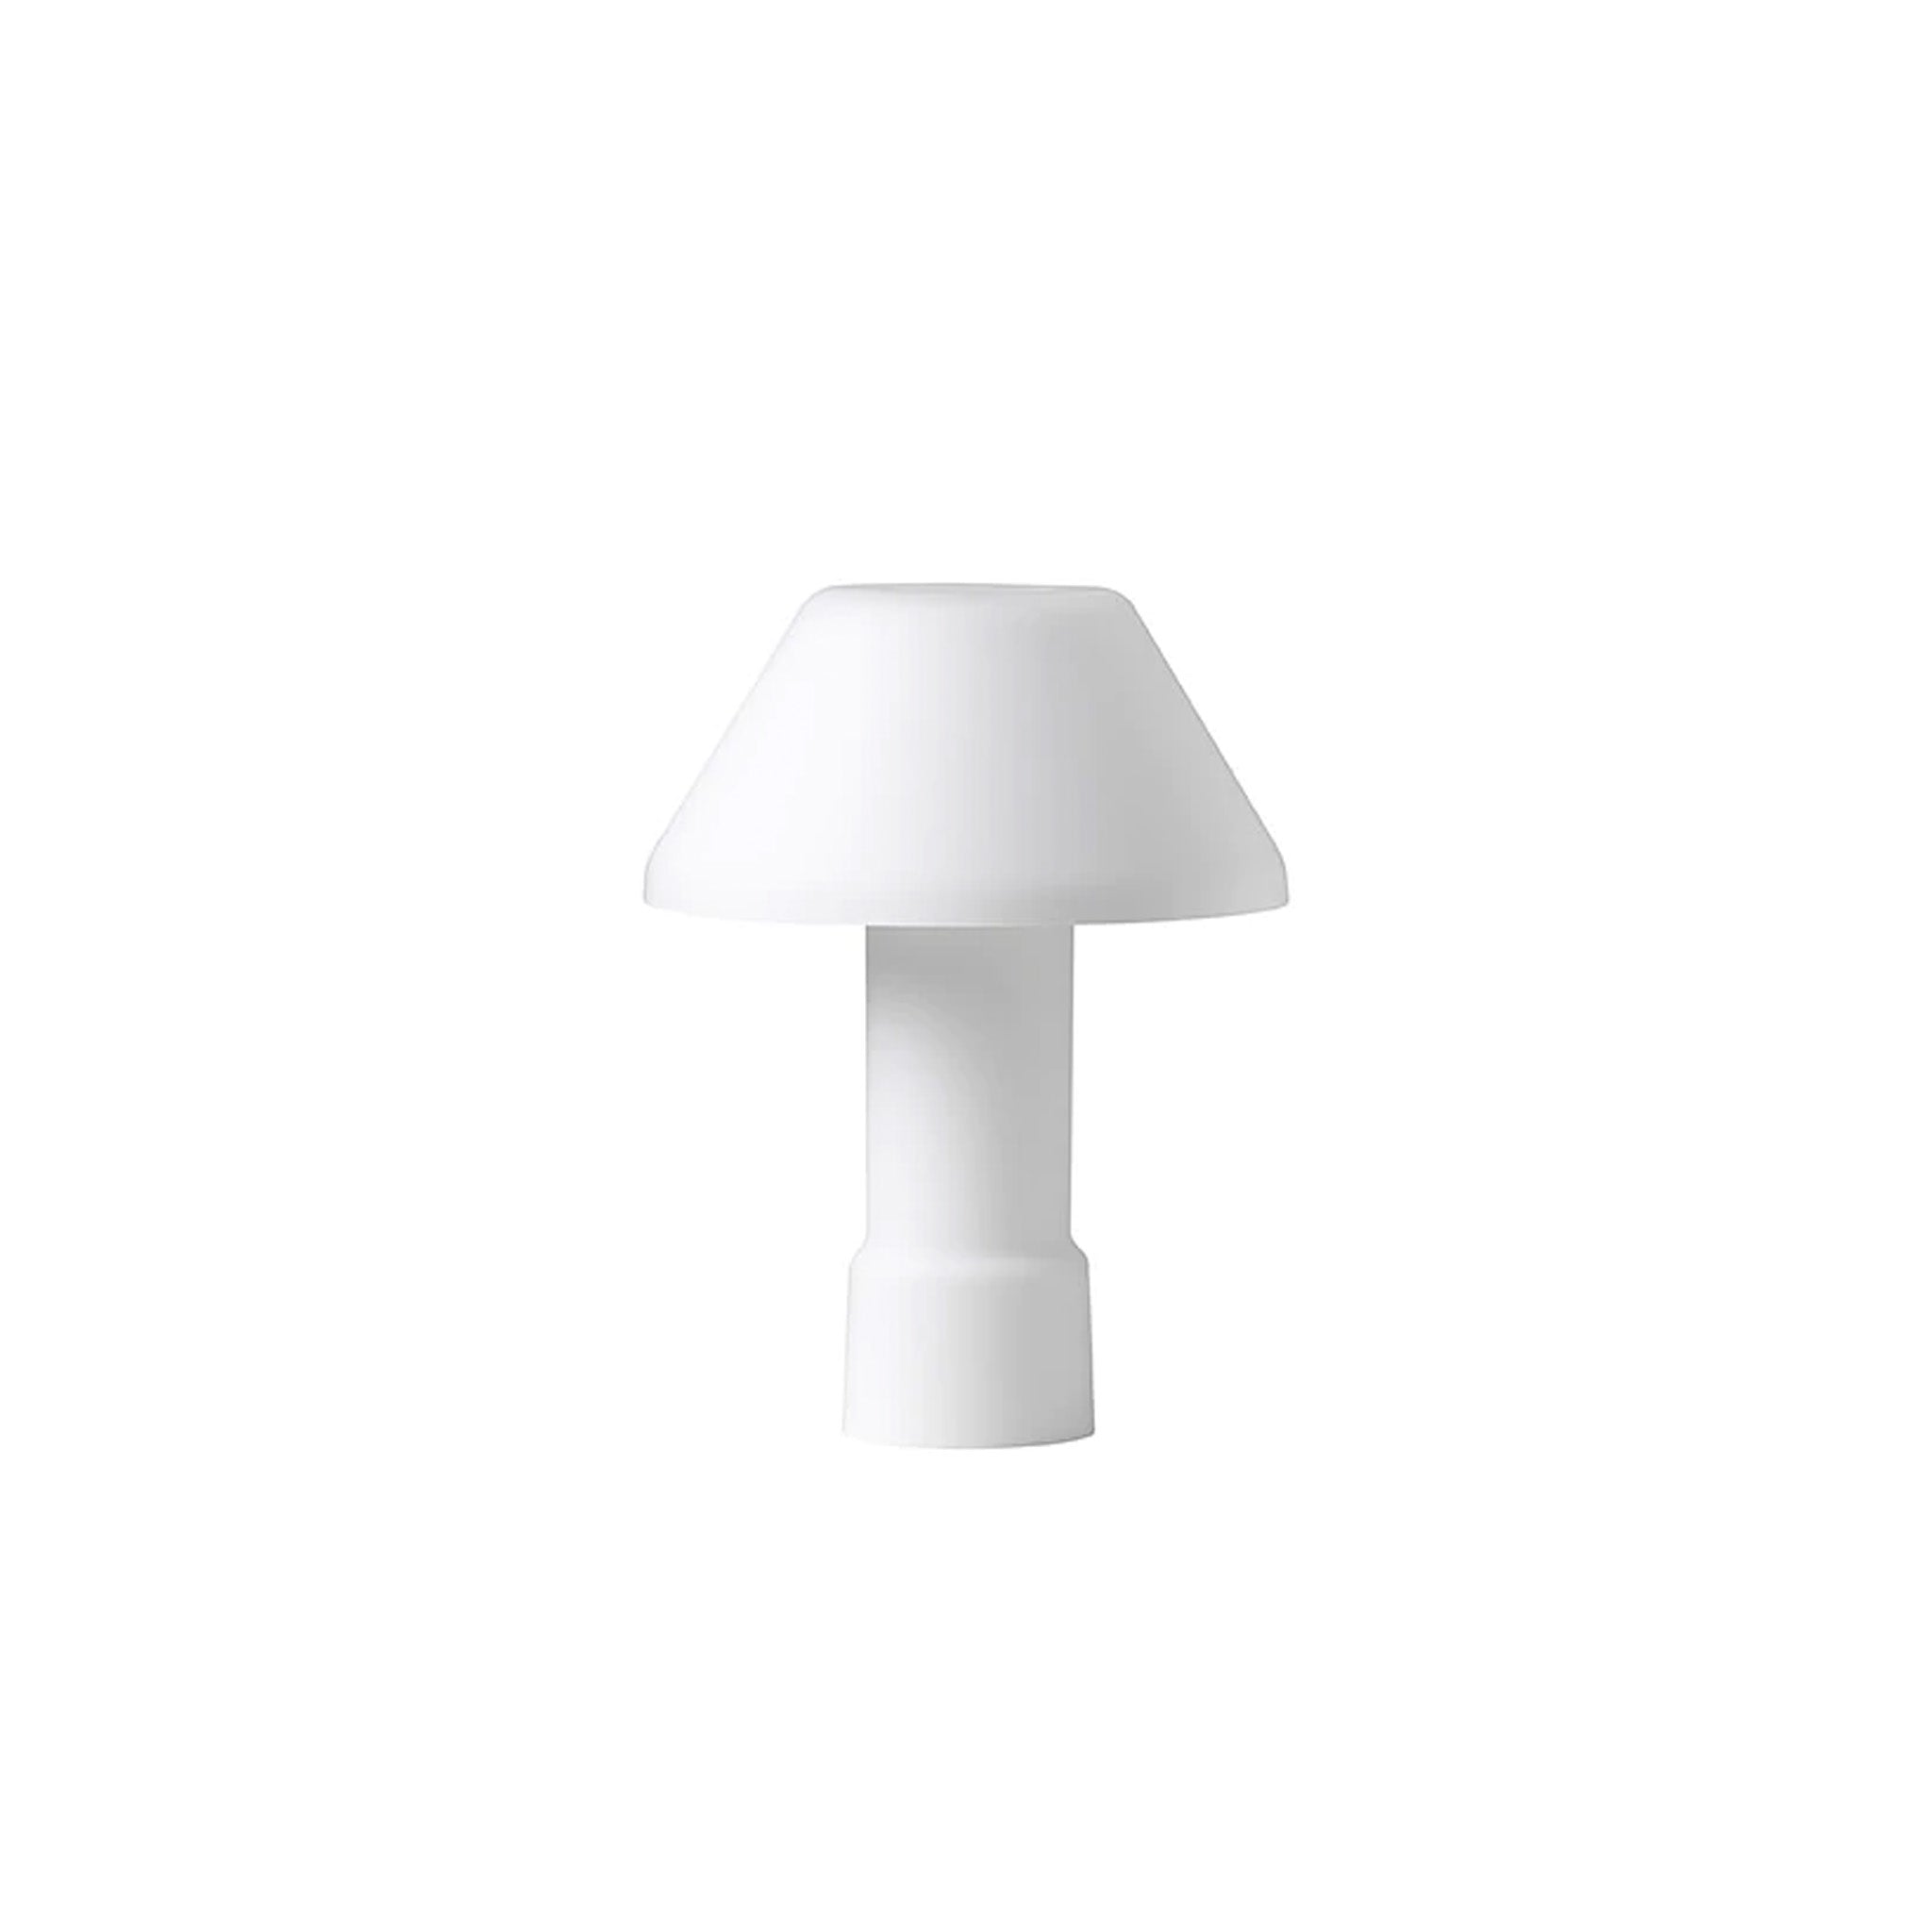 w163 Lampyre Table Lamp by Wastberg